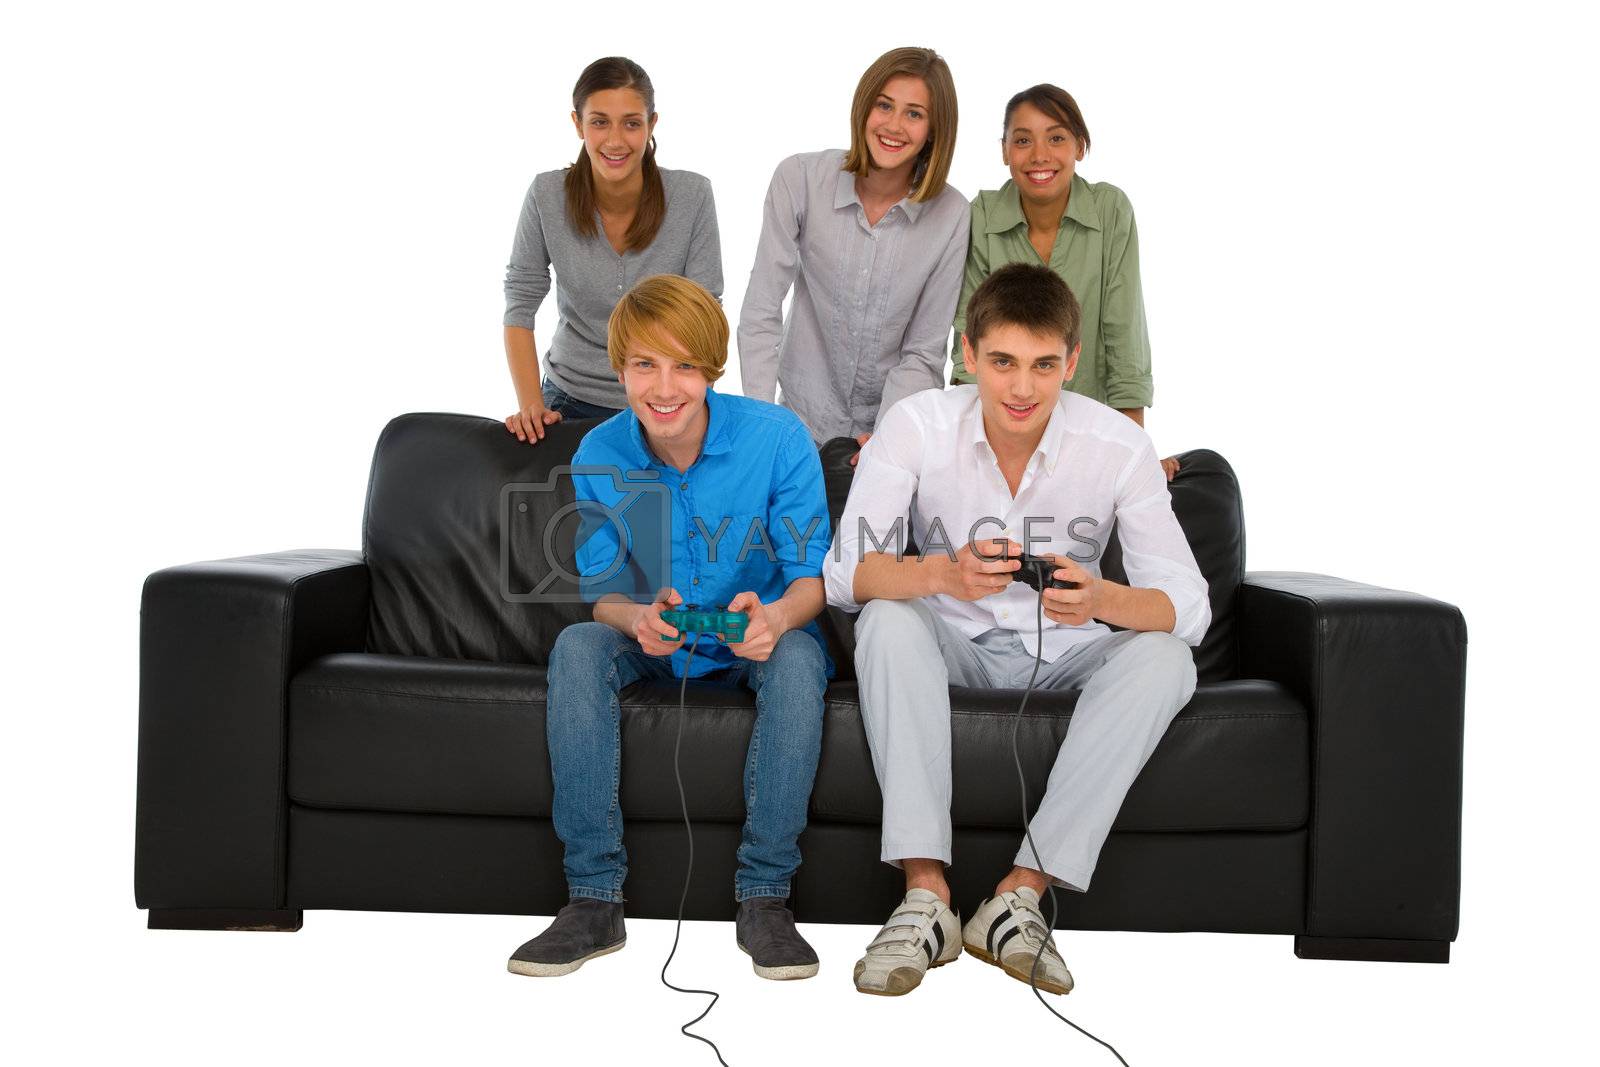 Royalty free image of teenagers playing with playstation by ambro